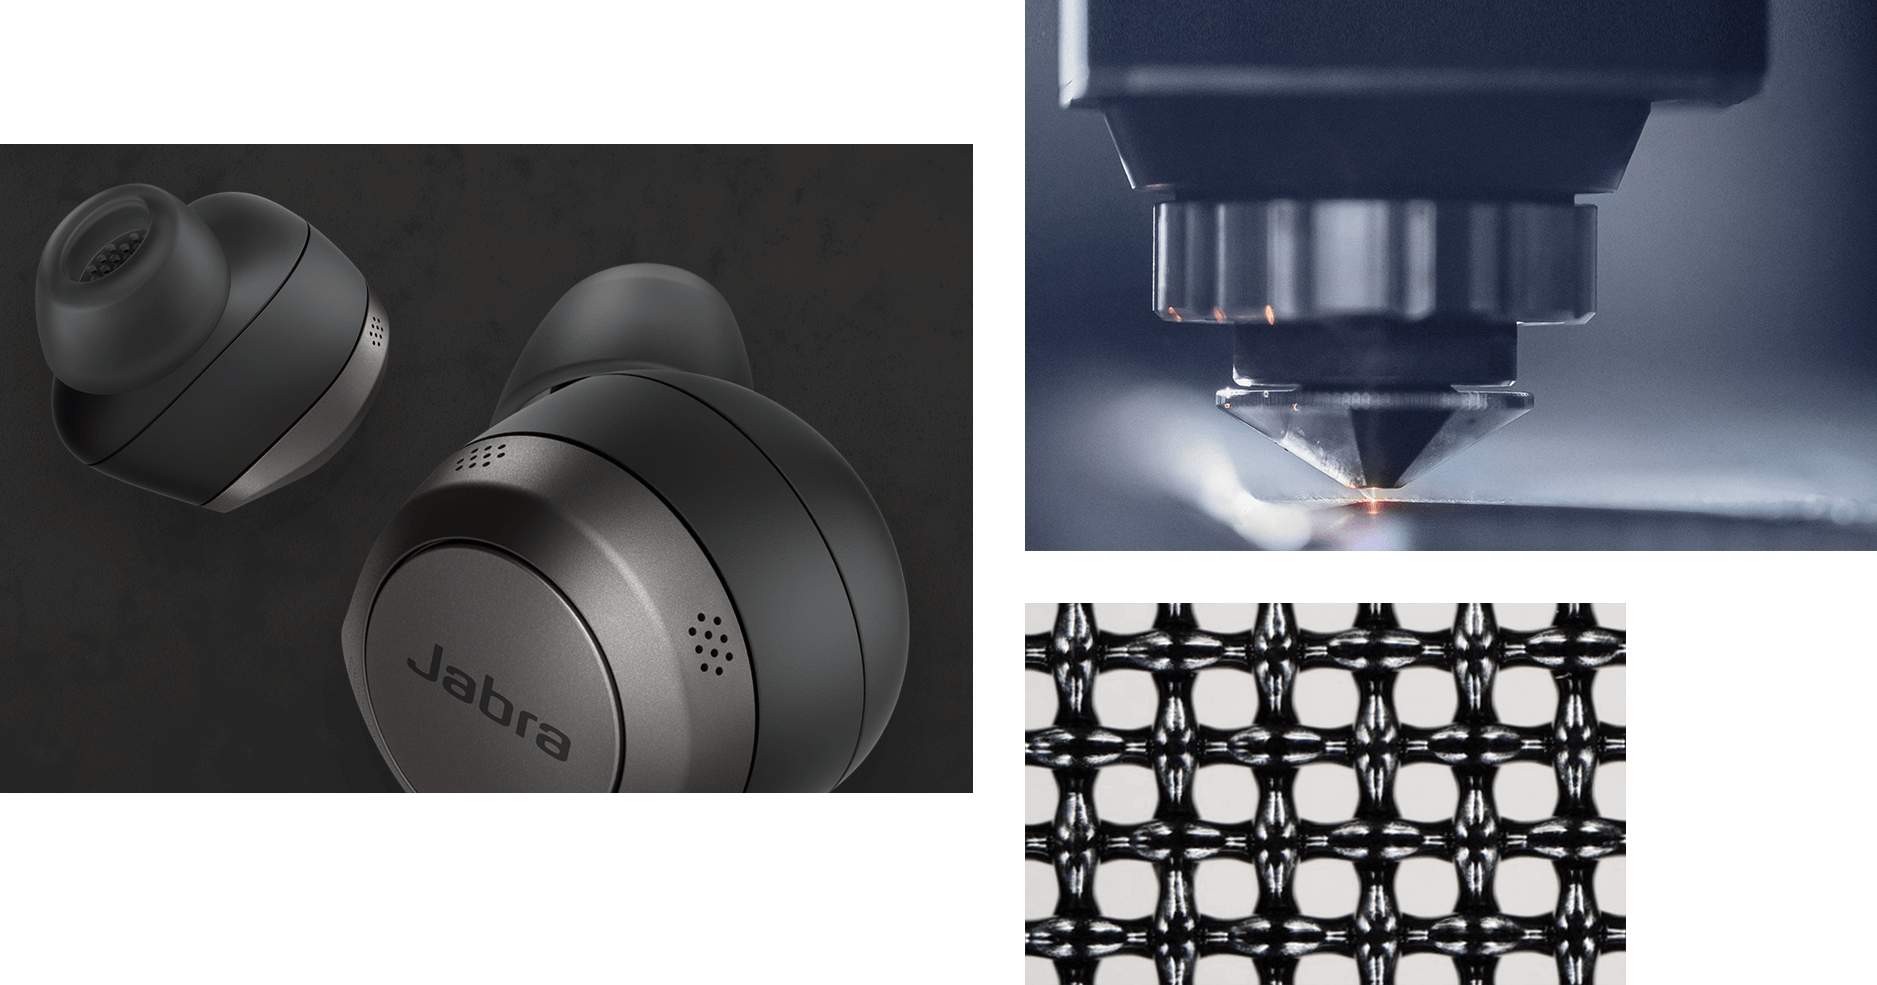 True wireless earbuds with fully adjustable ANC | Jabra Elite 85t